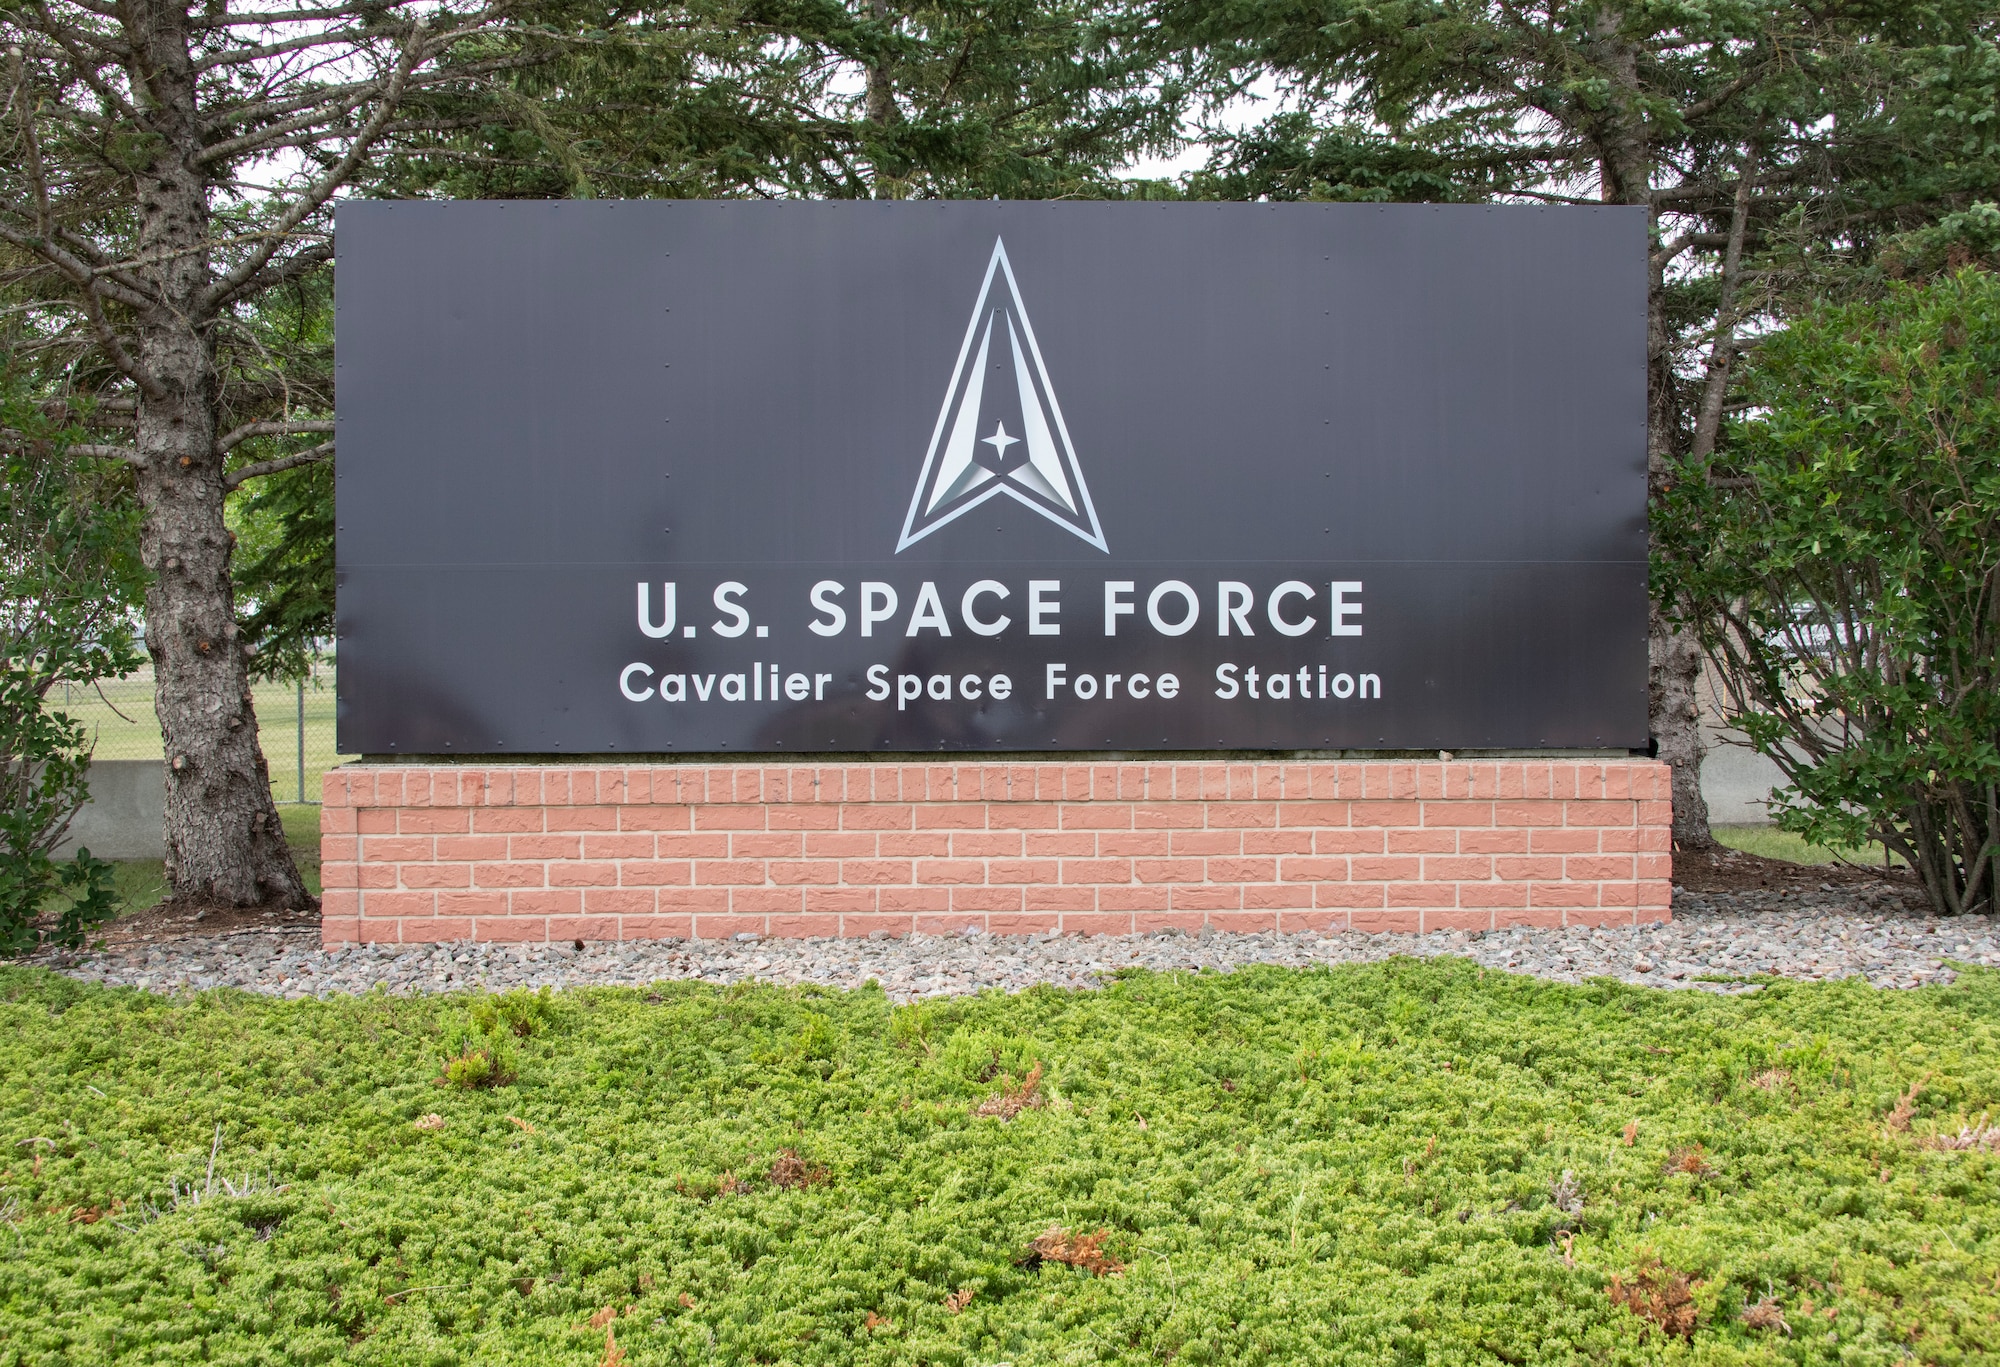 The Cavalier Space Force Station sign is unveiled during the renaming ceremony at Cavalier Space Force Station, N.D., July 30, 2021.